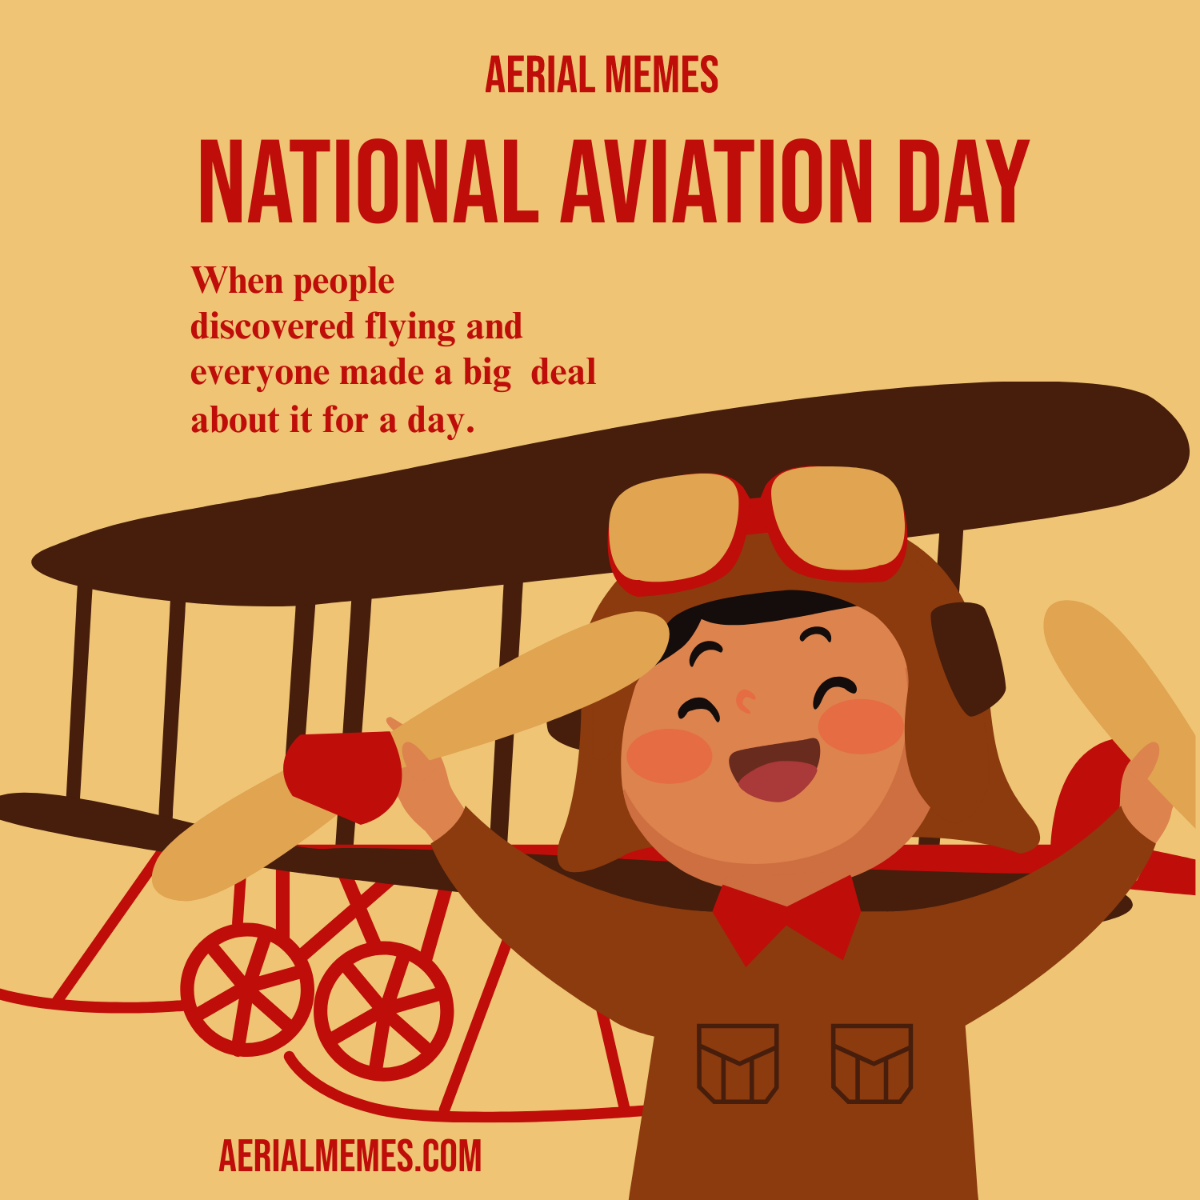 National Aviation Day Meme Template